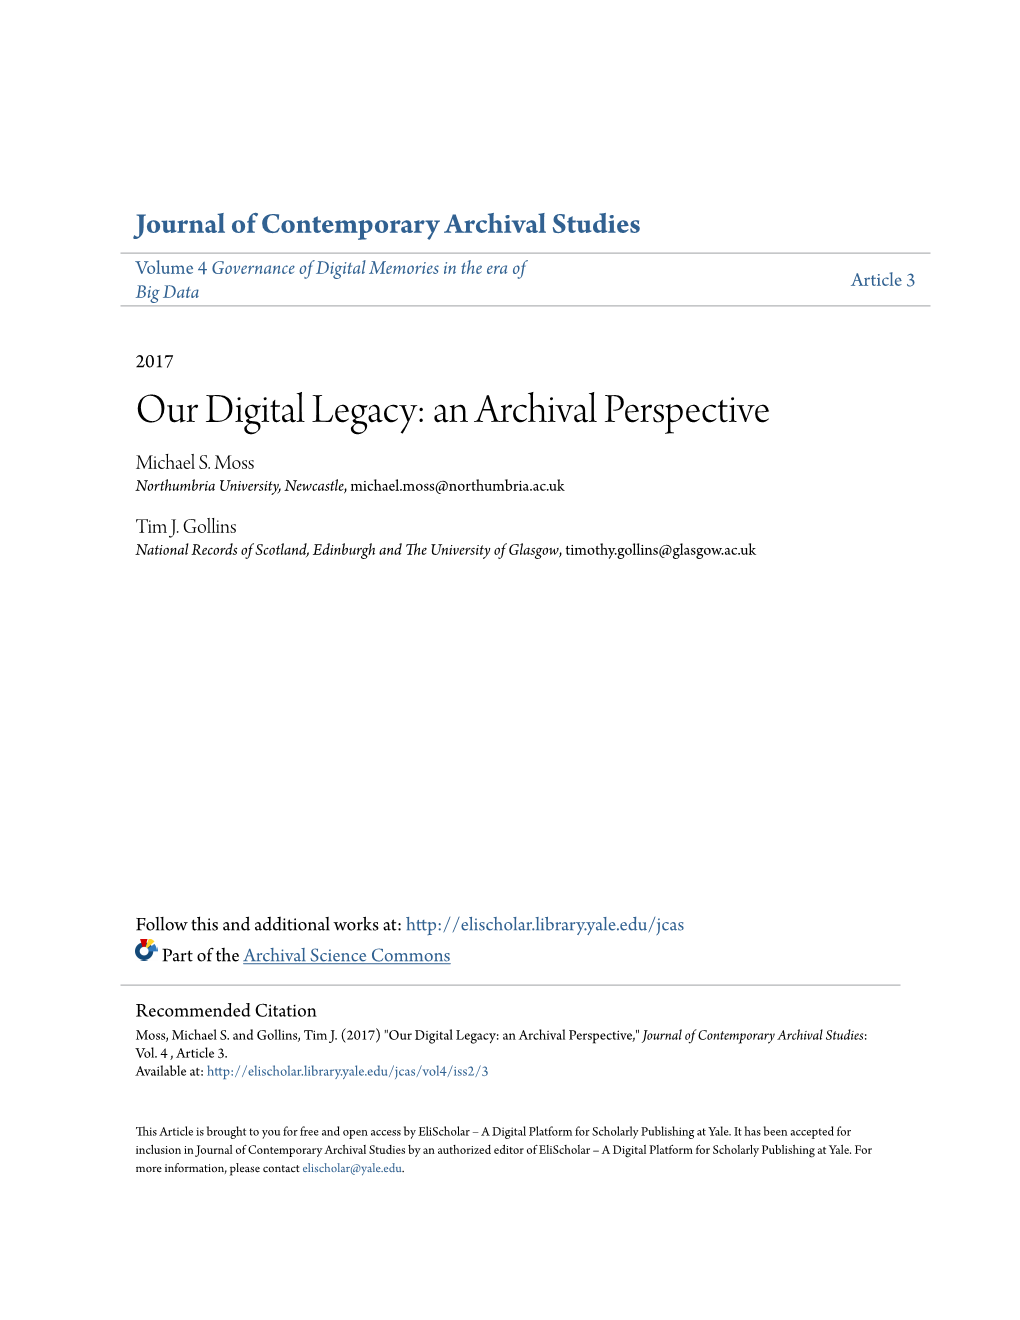 Our Digital Legacy: an Archival Perspective Michael S